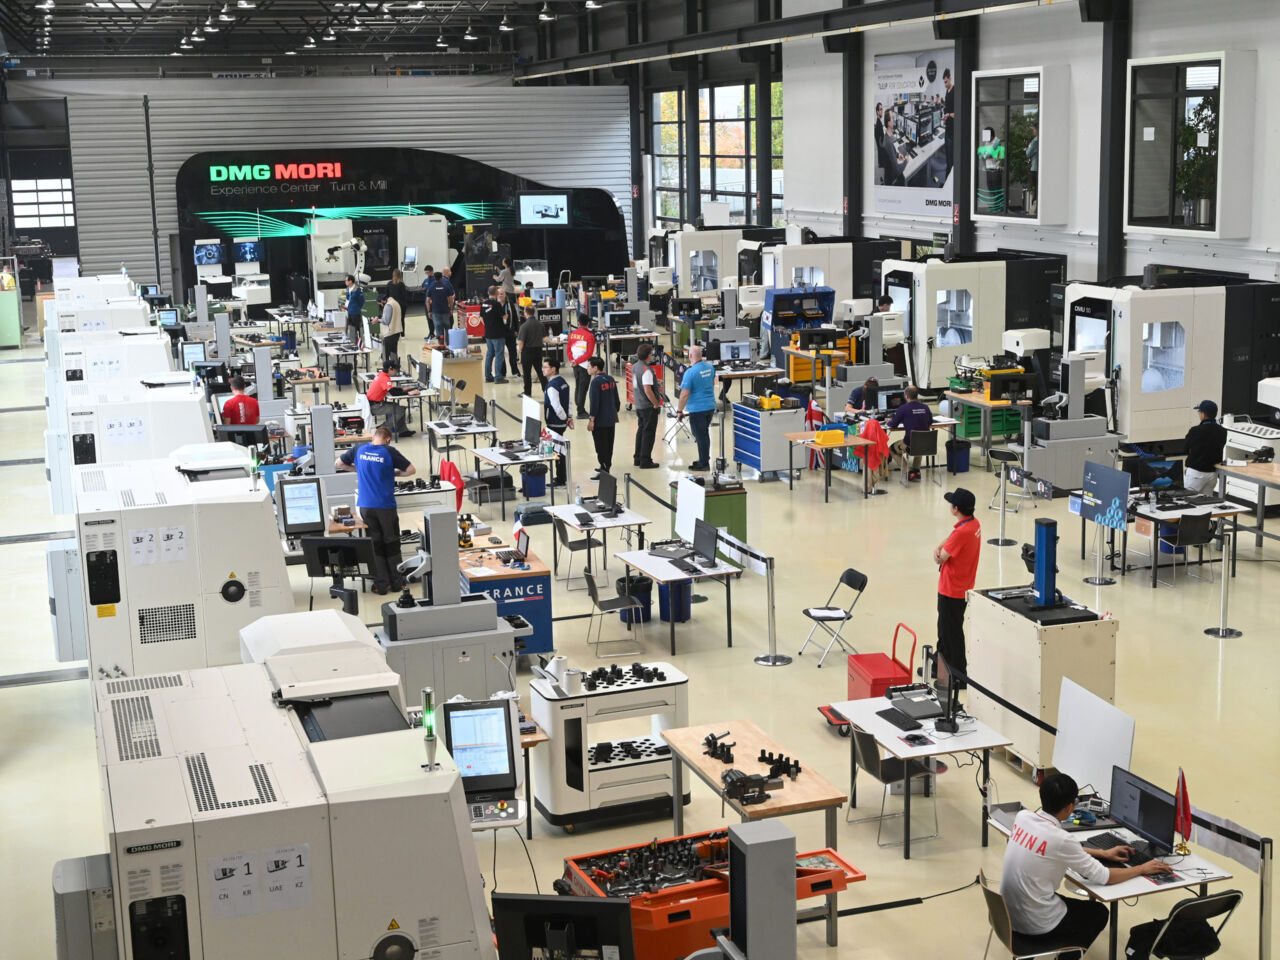 A wide shot of DMG MORI’s showroom in Leonberg, Germany where CNC Turning and CNC Milling are taking place.